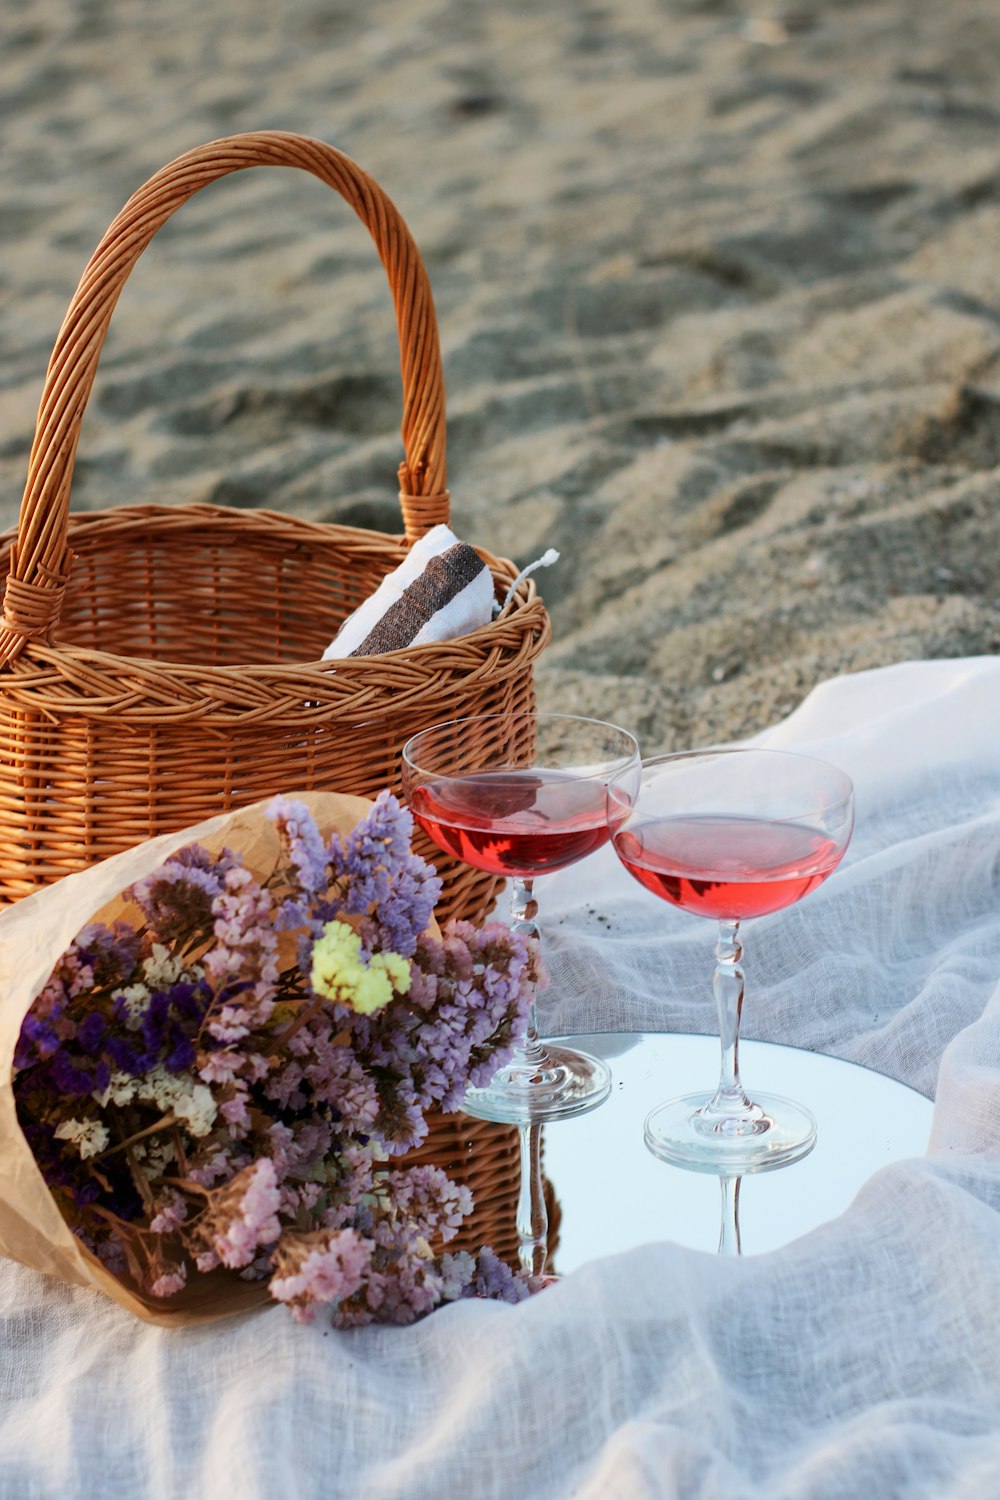 pink and white flowers in brown woven basket beside clear wine glass on white table cloth